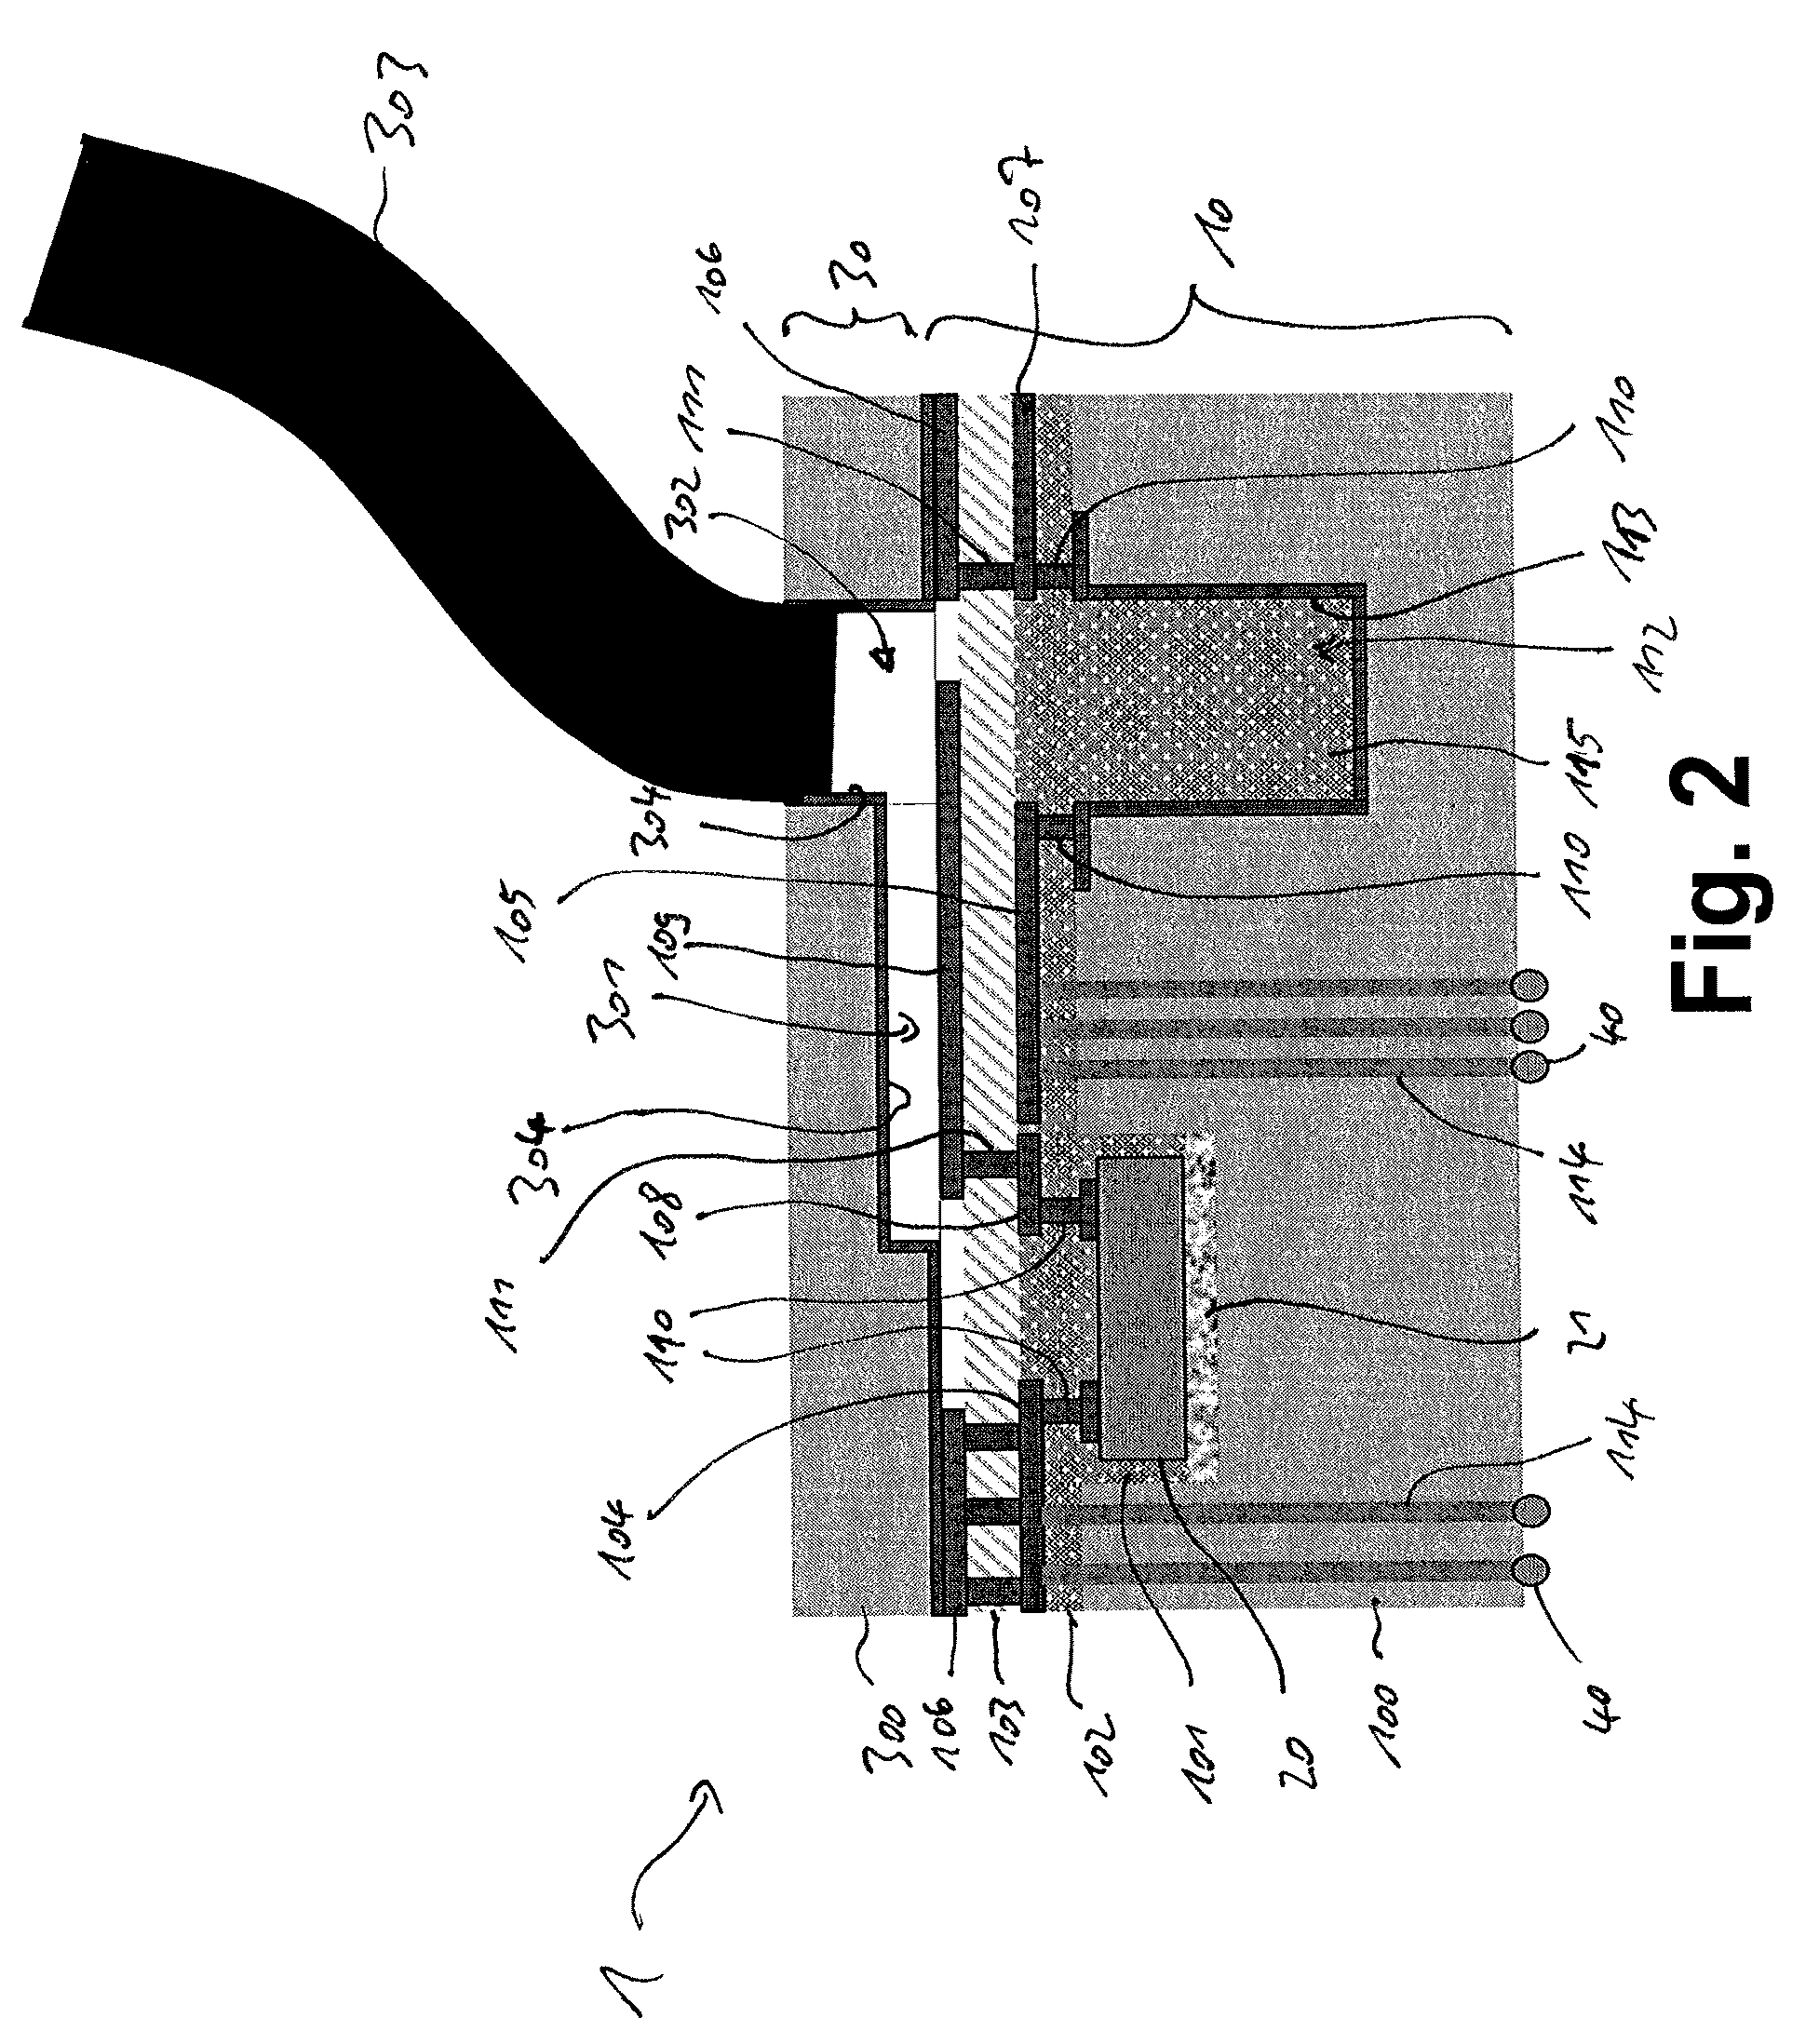 Package and antenna apparatus including package